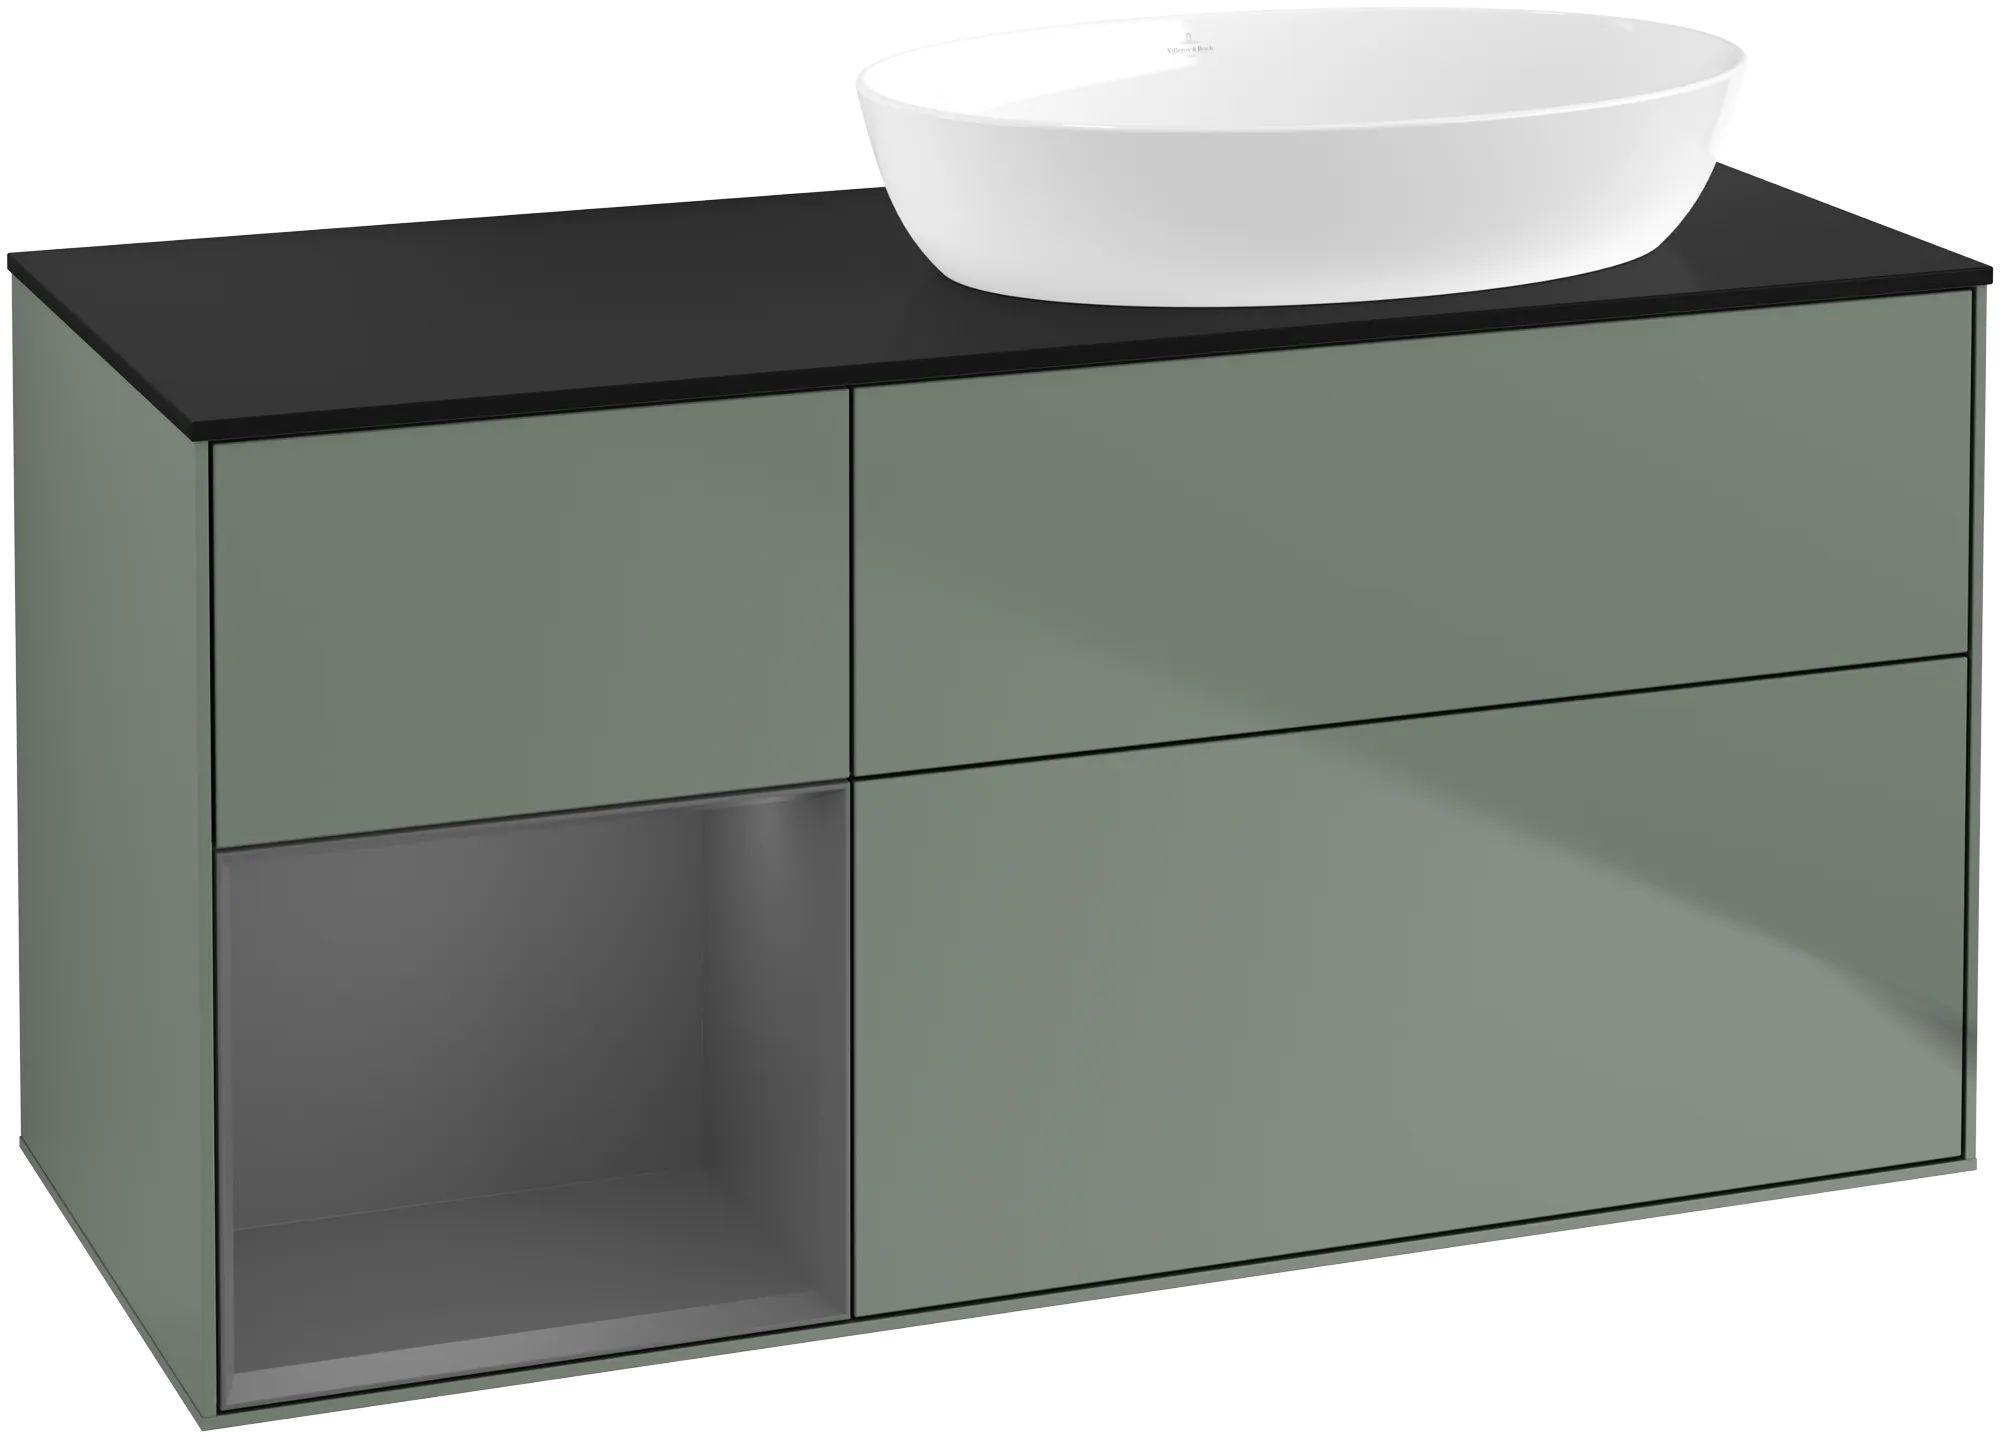 Picture of VILLEROY BOCH Finion Vanity unit, with lighting, 3 pull-out compartments, 1200 x 603 x 501 mm, Olive Matt Lacquer / Anthracite Matt Lacquer / Glass Black Matt #GA42GKGM